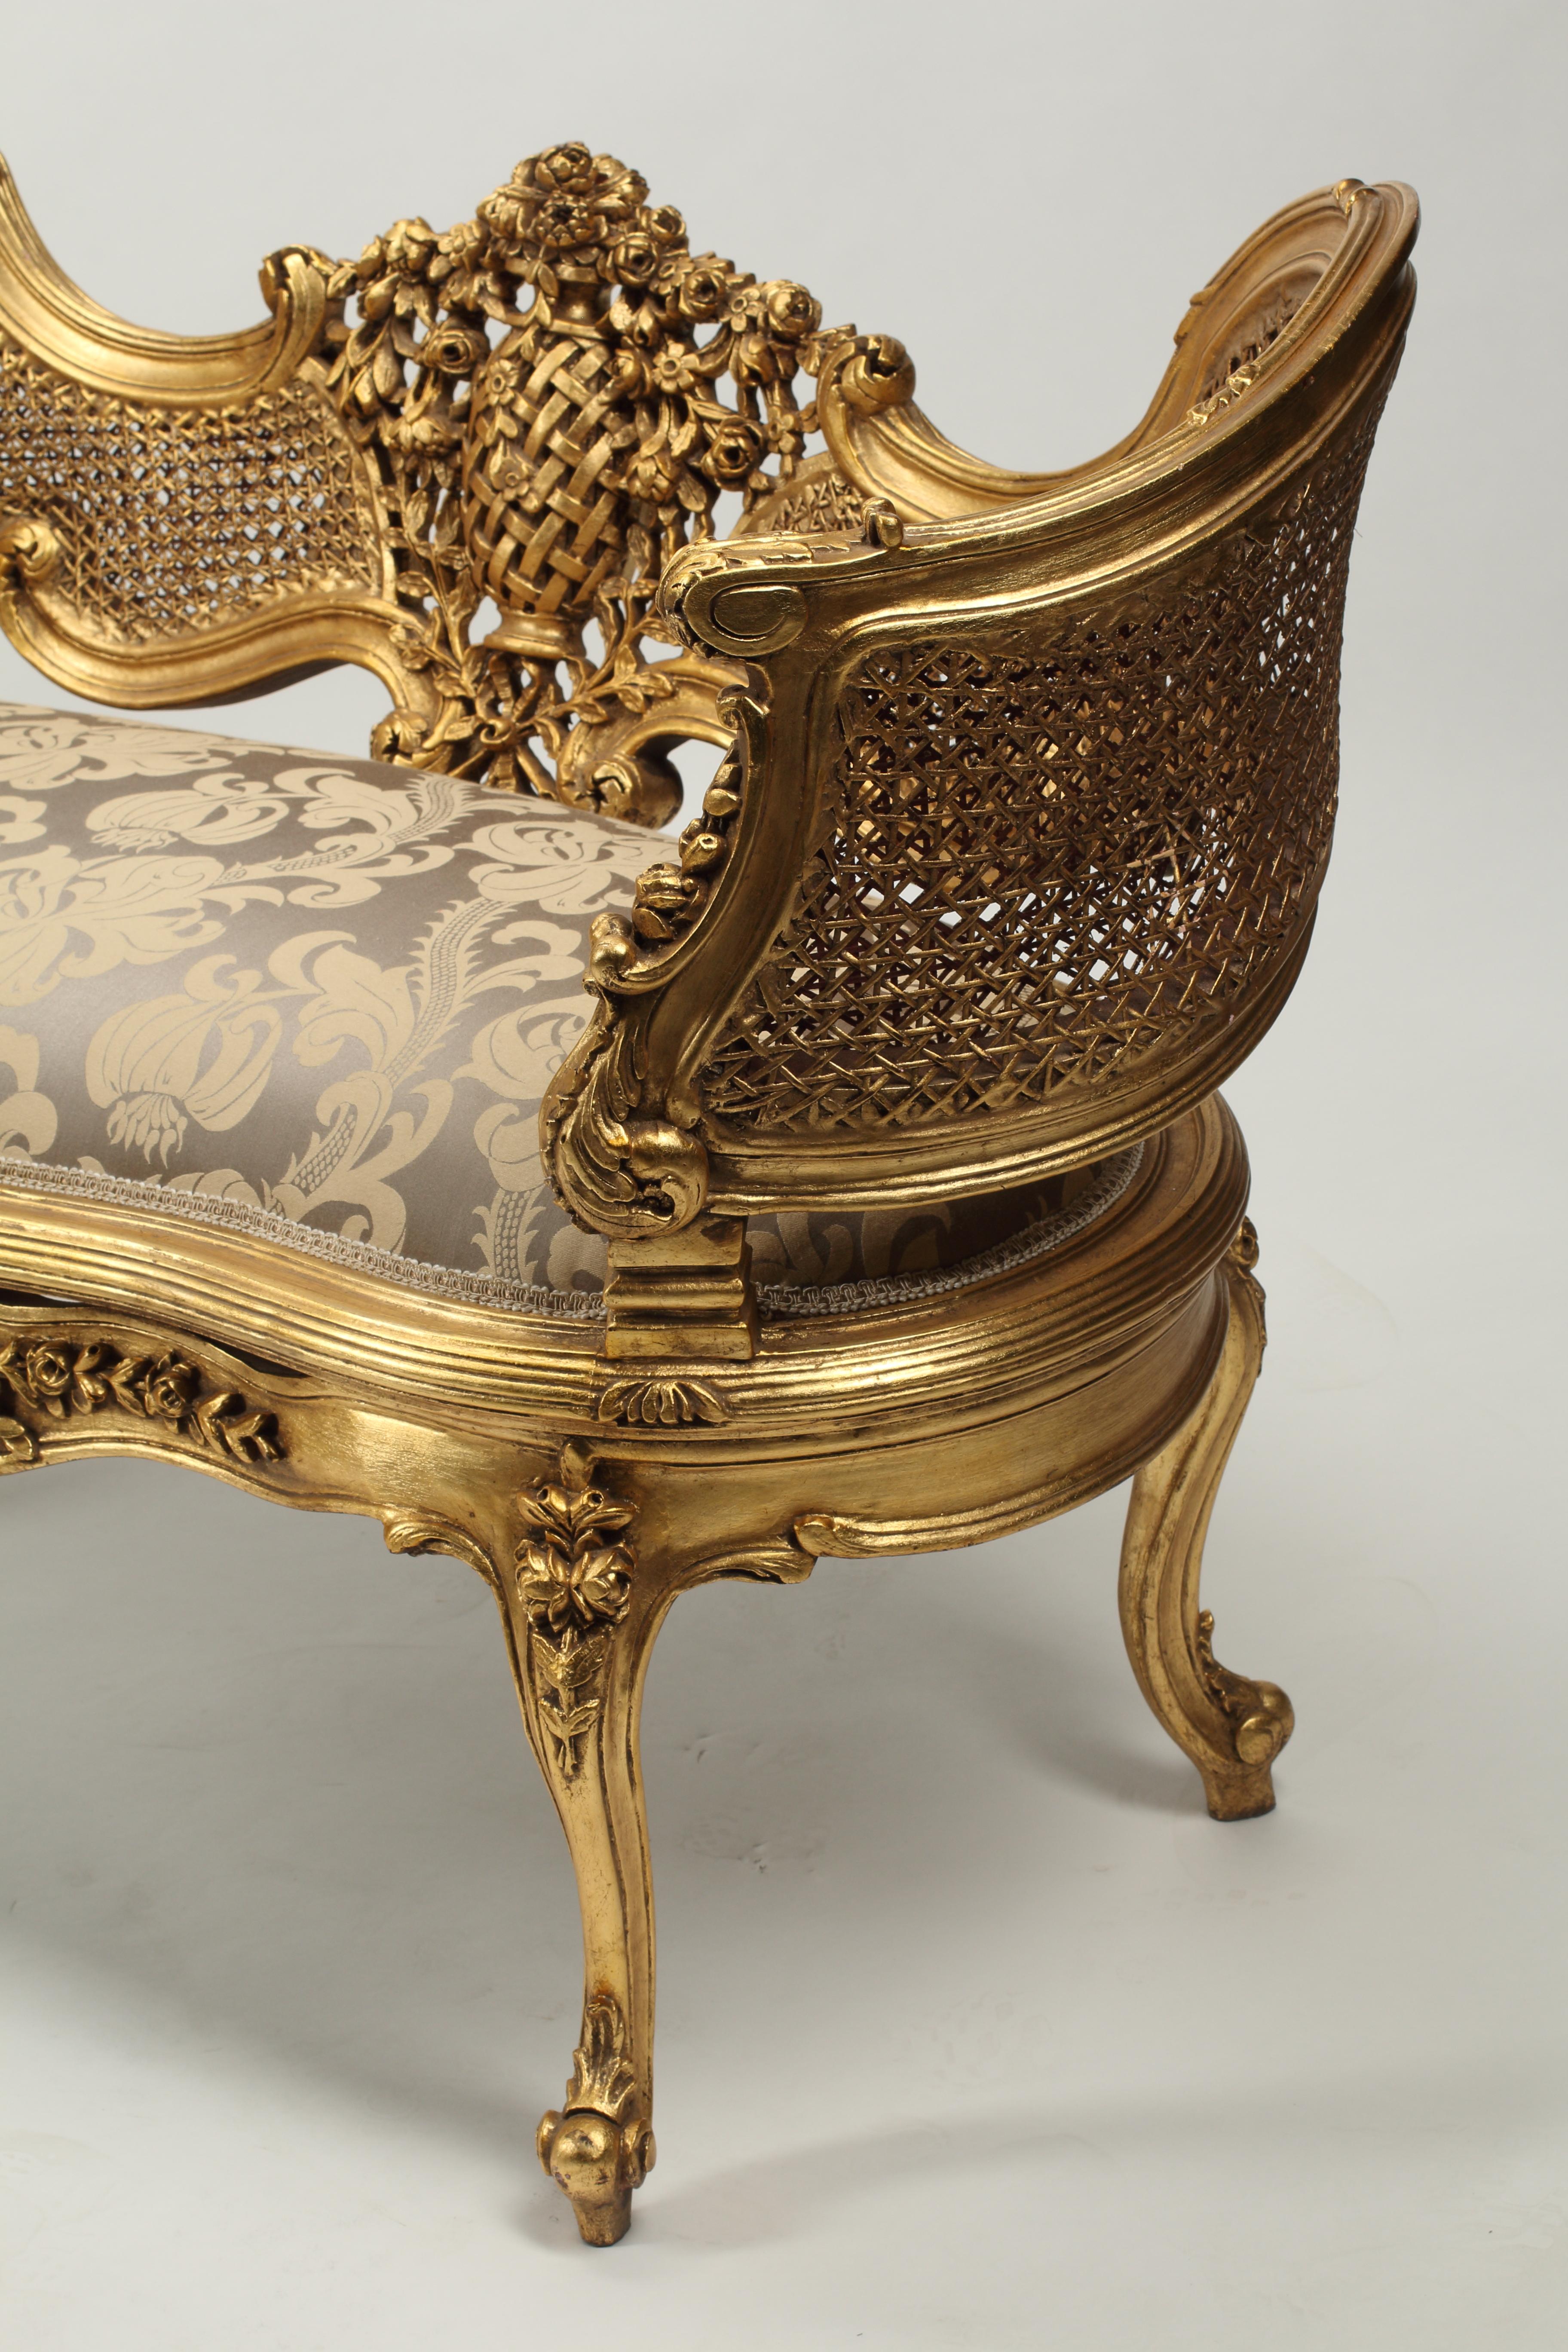 A lovely pair of giltwood Louis XV style upholstered settees. Caned seat backs and arms. Features highly decorative carvings of floral and foliage motifs on frame of settees. 
Newly upholstered with a taupe and golden fabric with simple braided